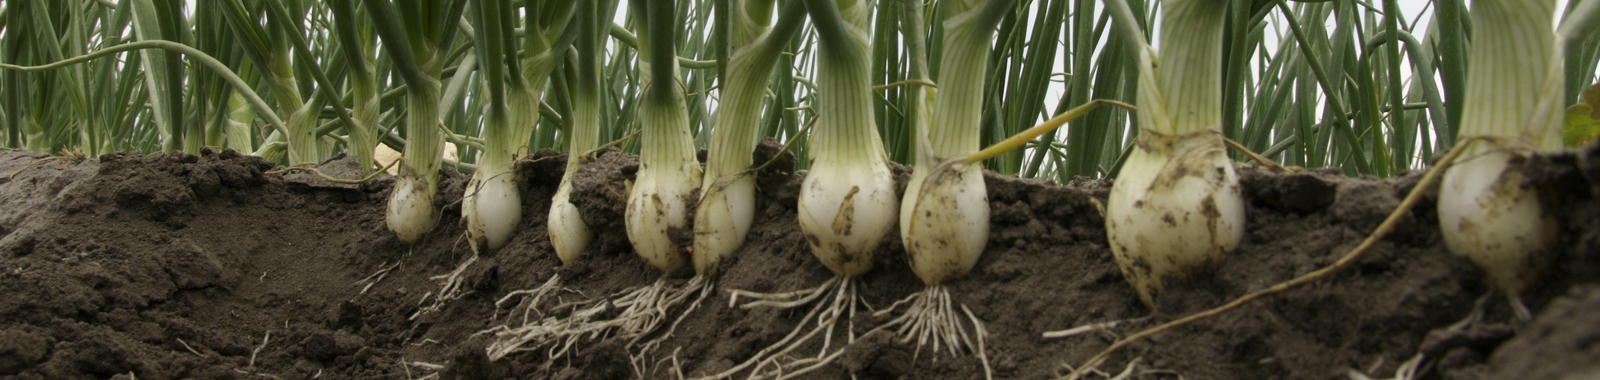 Role of Manganese in Onion Production